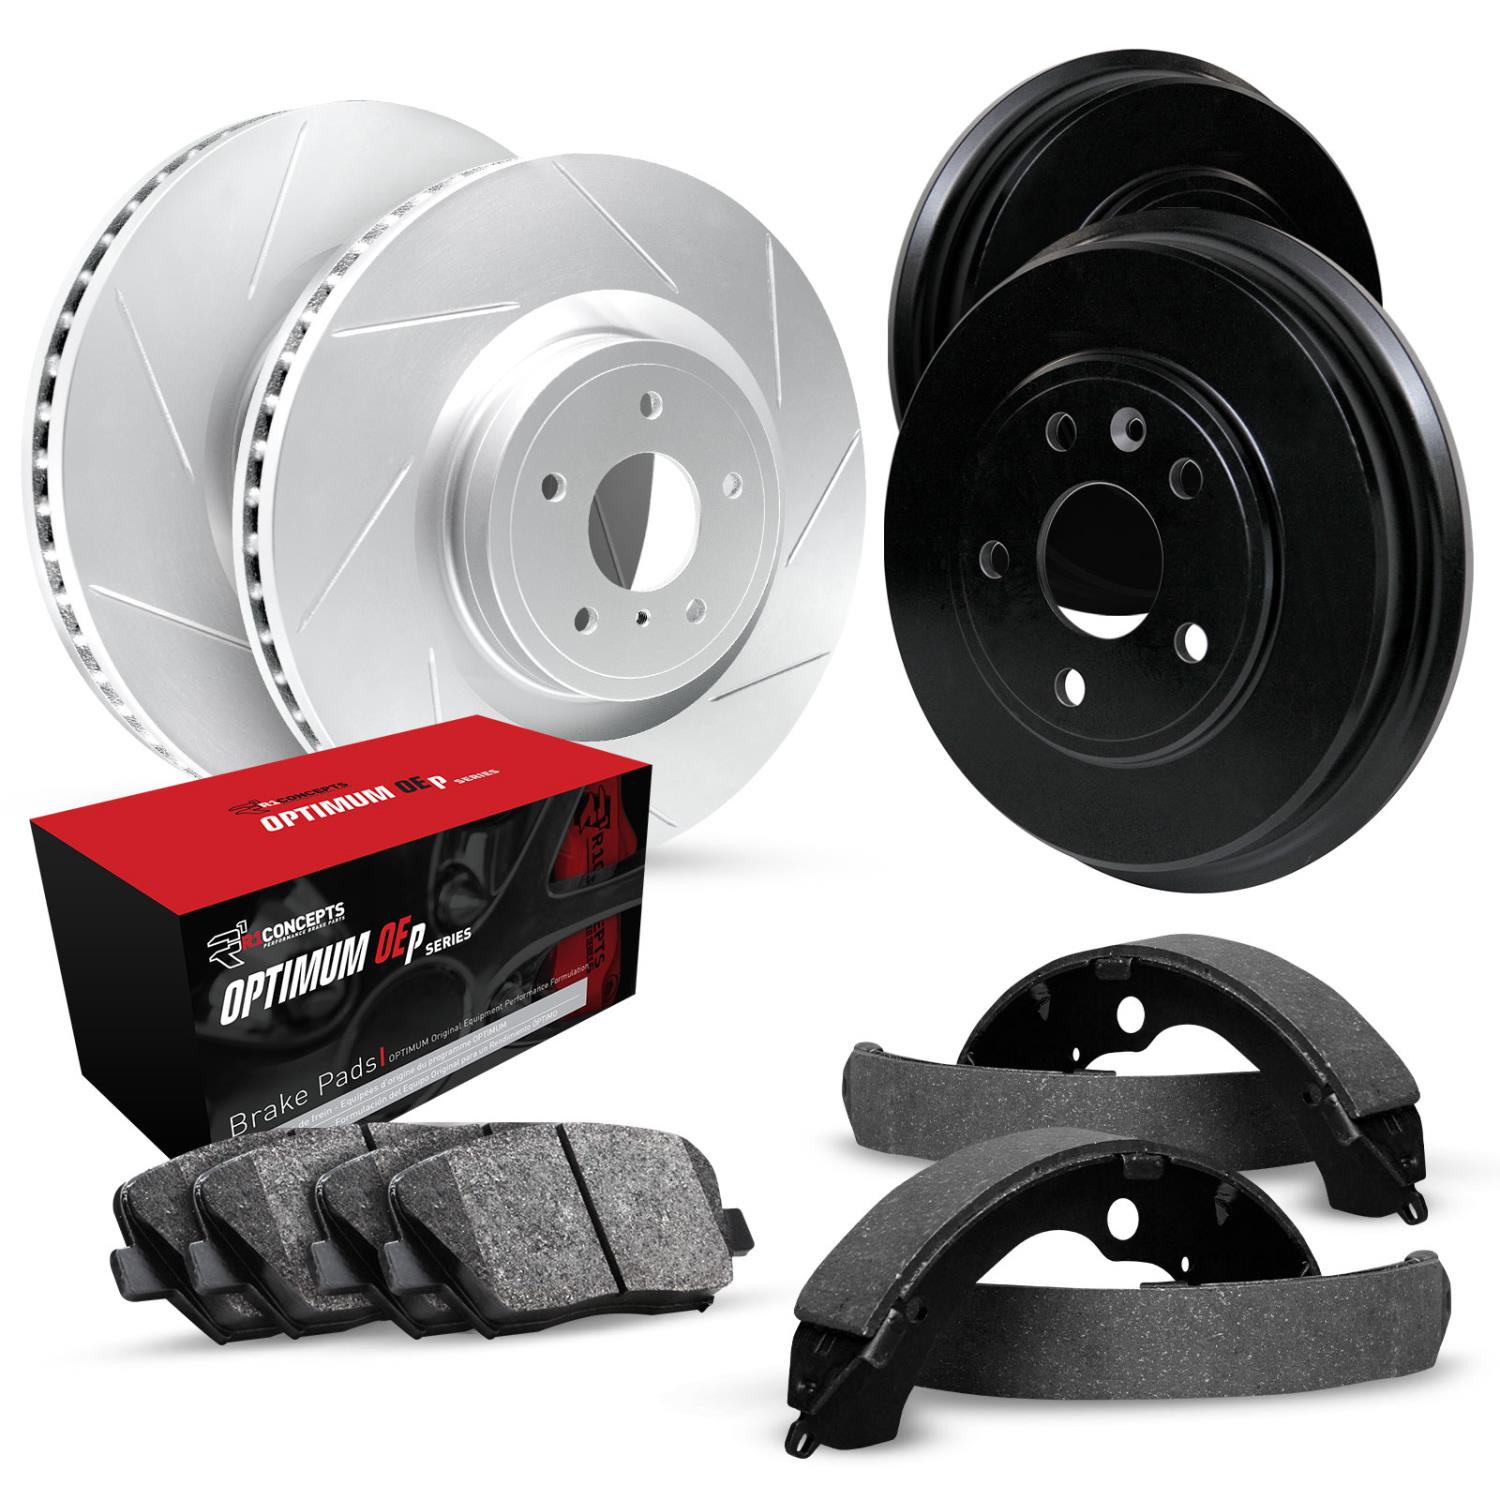 GEO-Carbon Slotted Brake Rotor & Drum Set w/Optimum OE Pads & Shoes, 2007-2014 Infiniti/Nissan, Position: Front & Rear